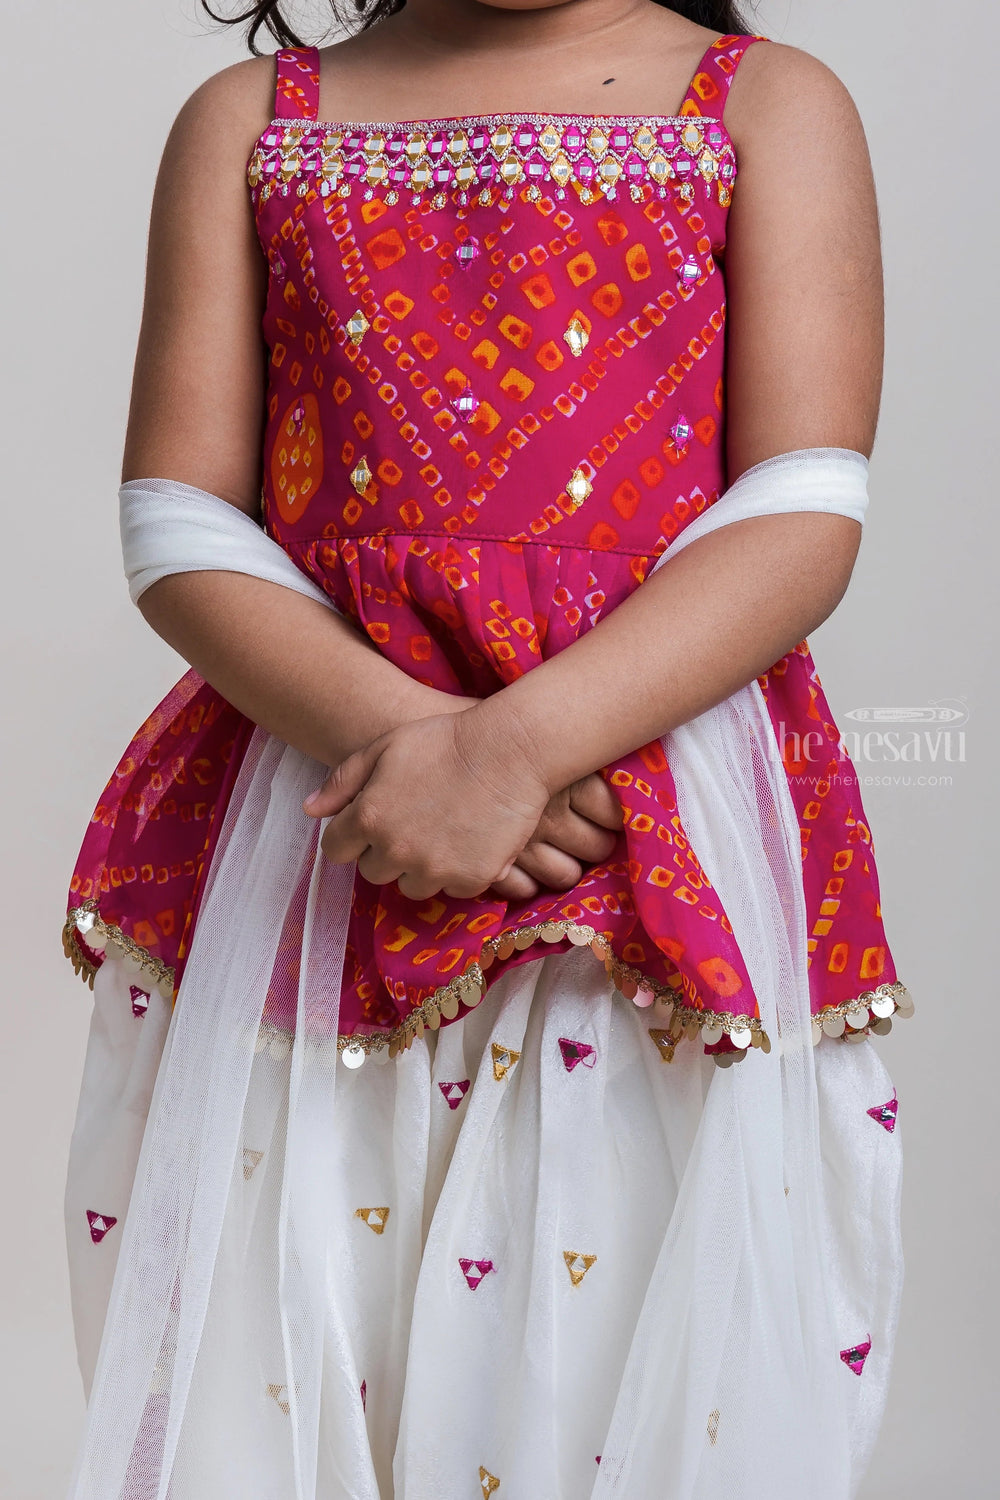 The Nesavu Girls Dothi Sets Red Short Tops With Mirror Embroidered Patiala Pants For Girls Nesavu Traditional Short Tops And Patiala Pants| New Collection| The Nesavu